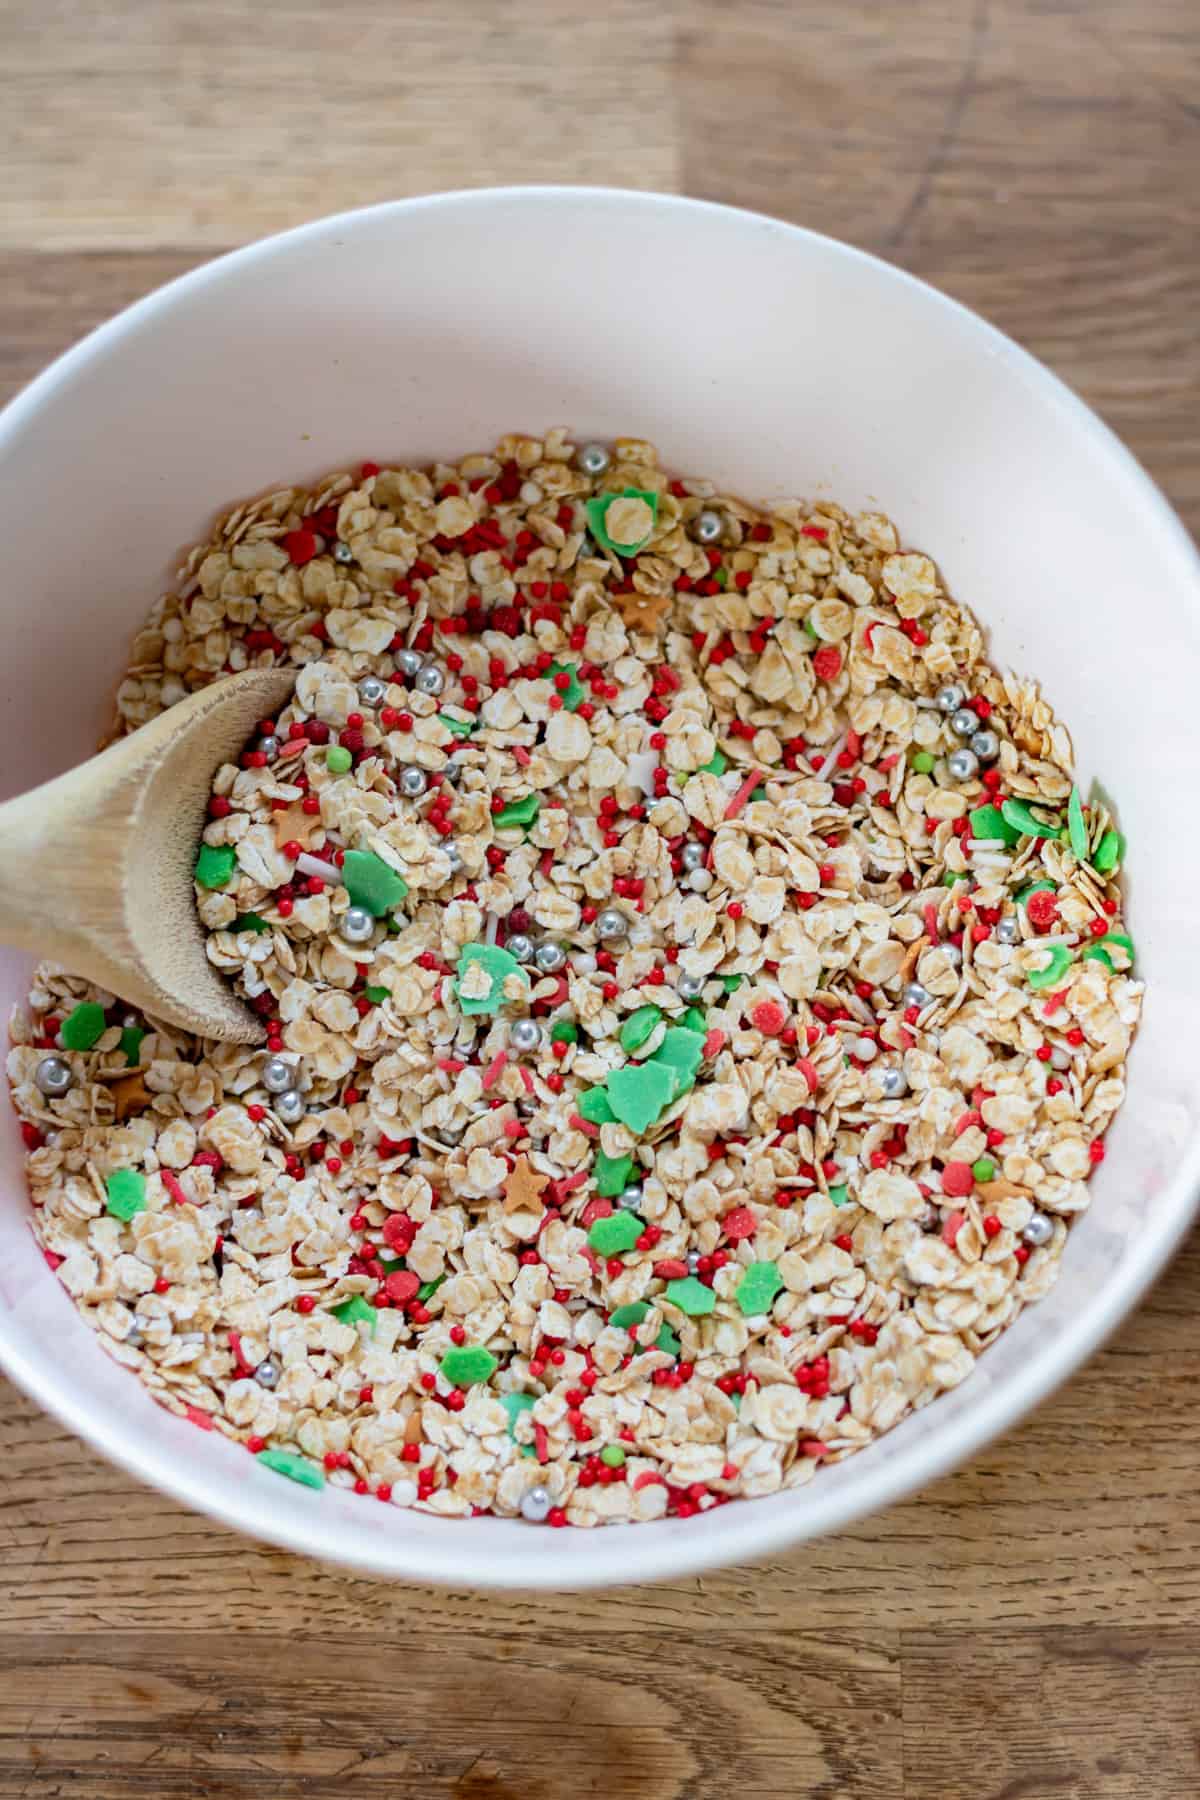 Mixed magic reindeer food in a bowl.